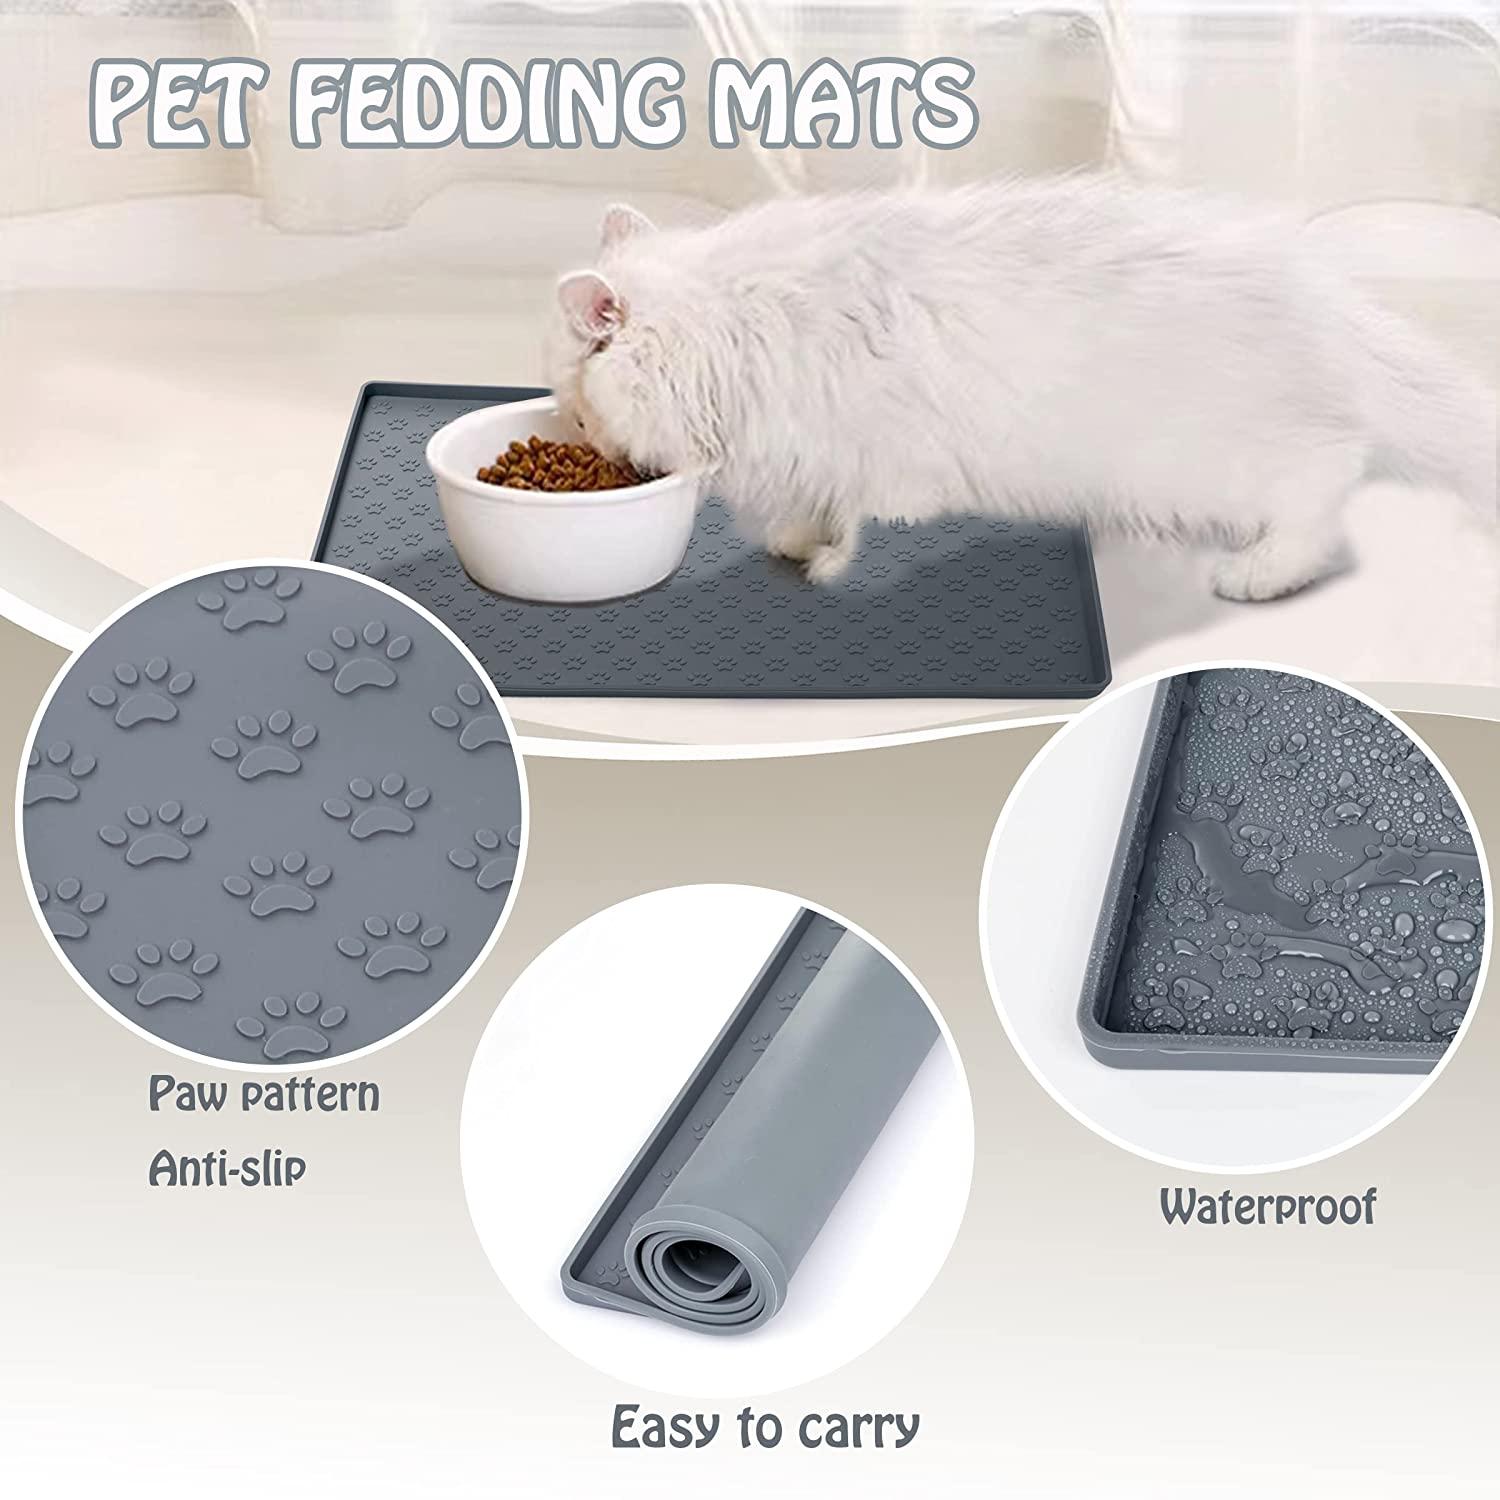 Dog feeding mats for food and water,dog dish mats for floors  waterproof,waterproof floor mat for pets,pet feeding mats for dogs,dog  waterproof mat,silicone dog bowl mat,food mat for cat bowls,pet placemats  for food